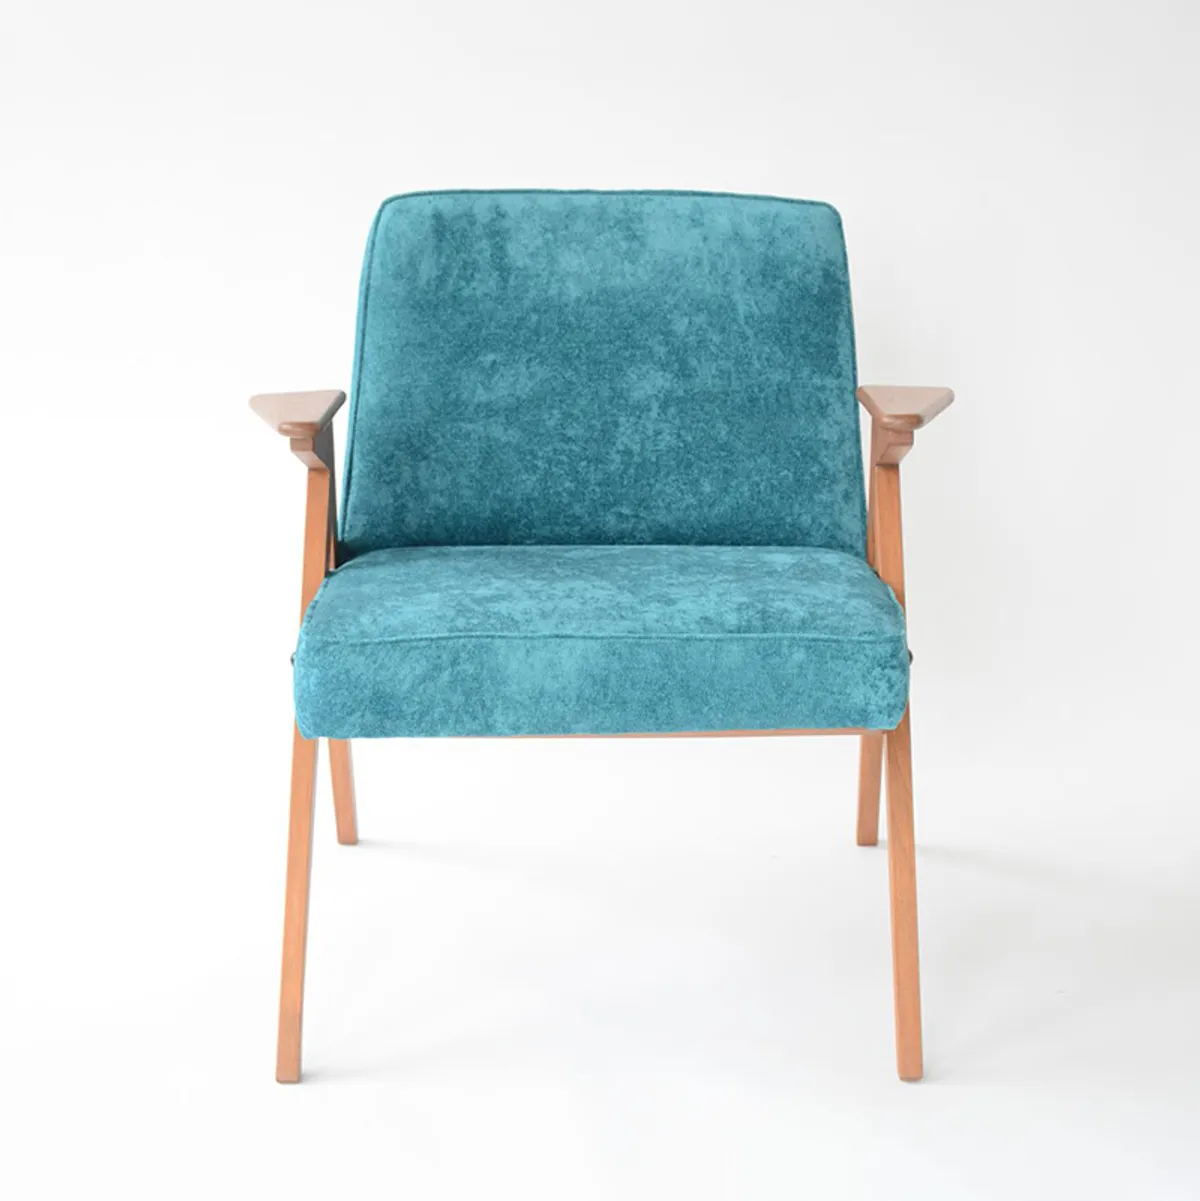 Bunny Armchair In Vintage Blue Velvet With Wooden Legs For Hotels And Offices By Insideoutcontracts 005